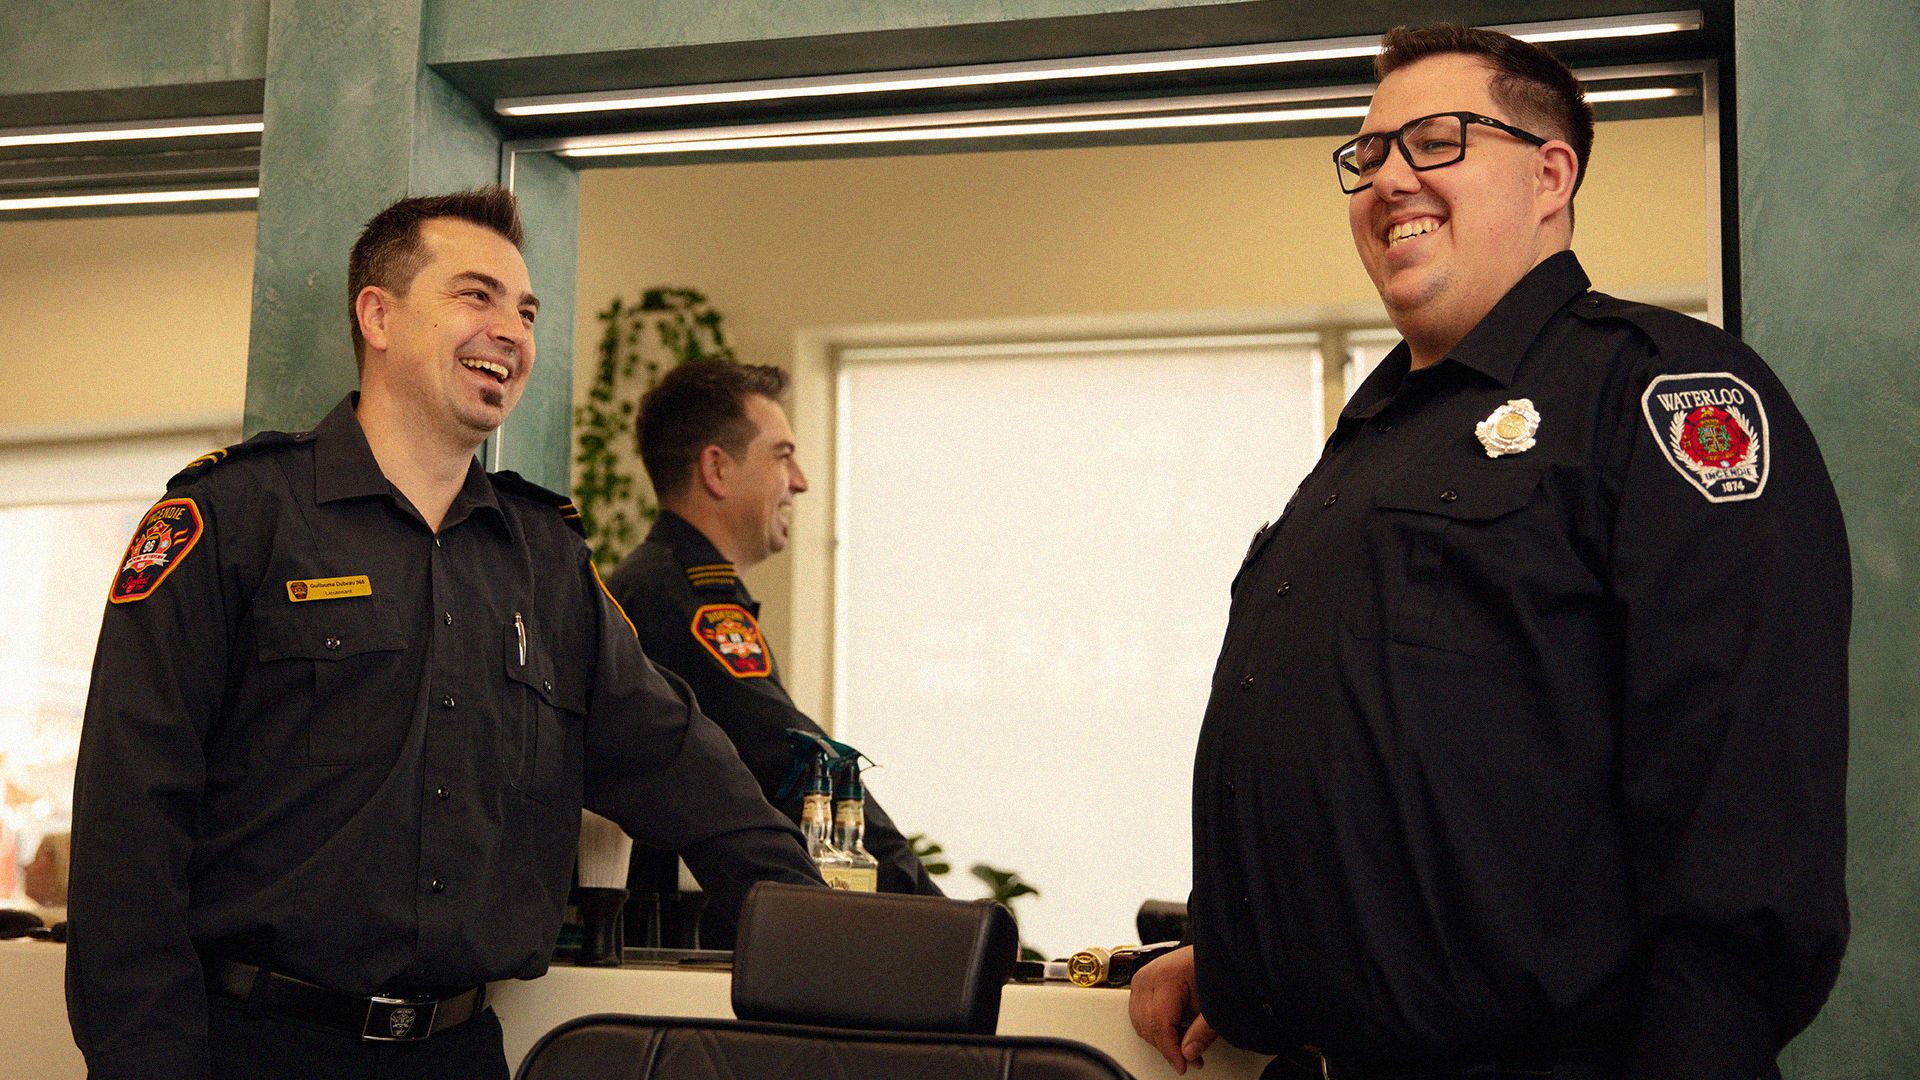 Two firefighters chatting and laughing, standing in front of a mirror at a barbershop